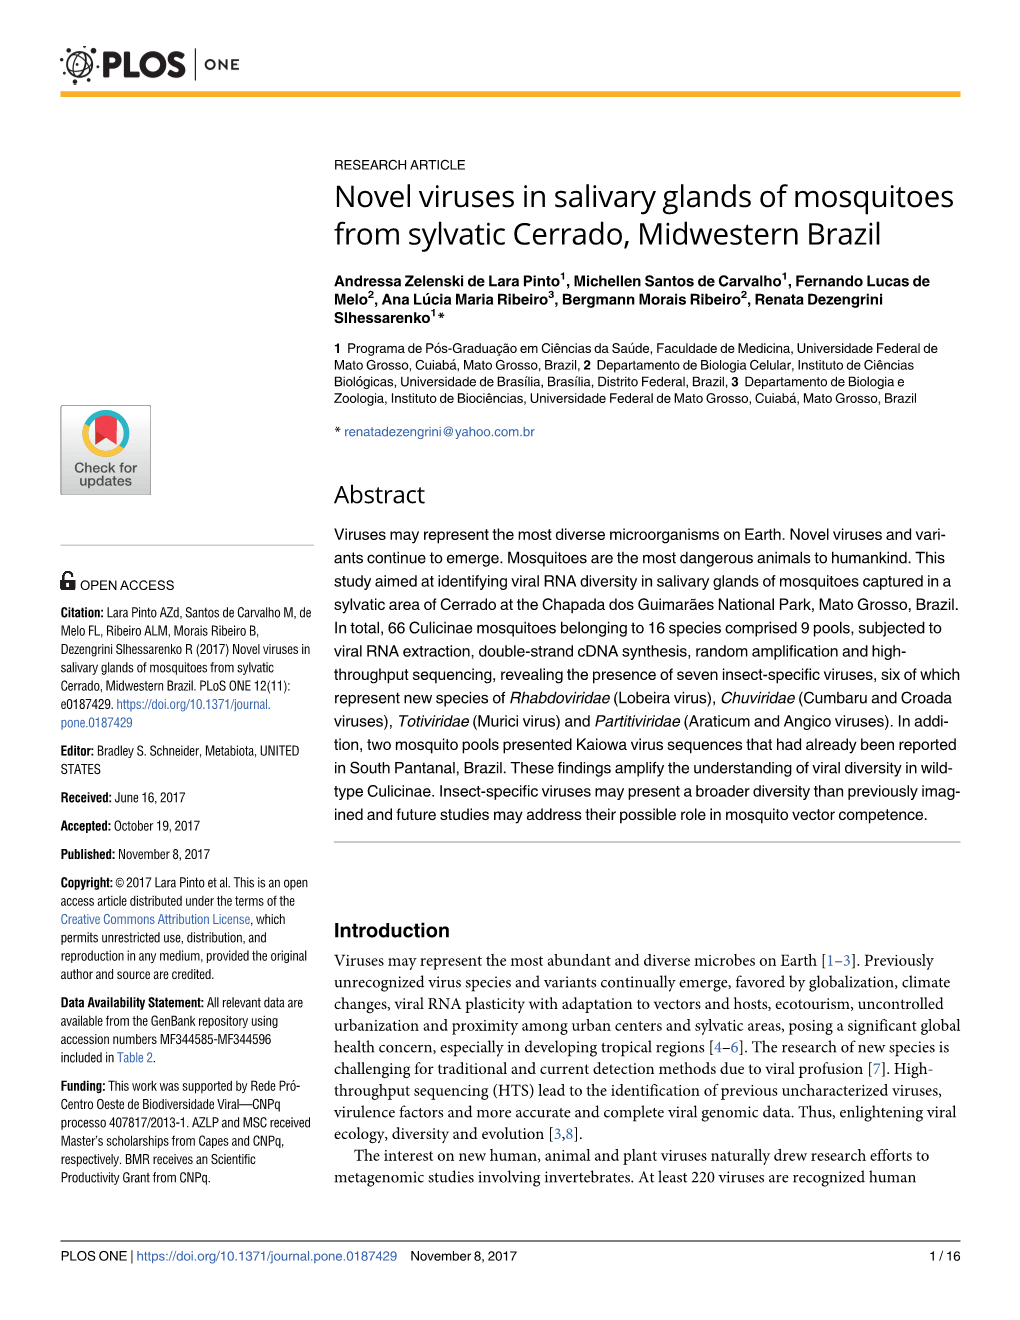 Novel Viruses in Salivary Glands of Mosquitoes from Sylvatic Cerrado, Midwestern Brazil